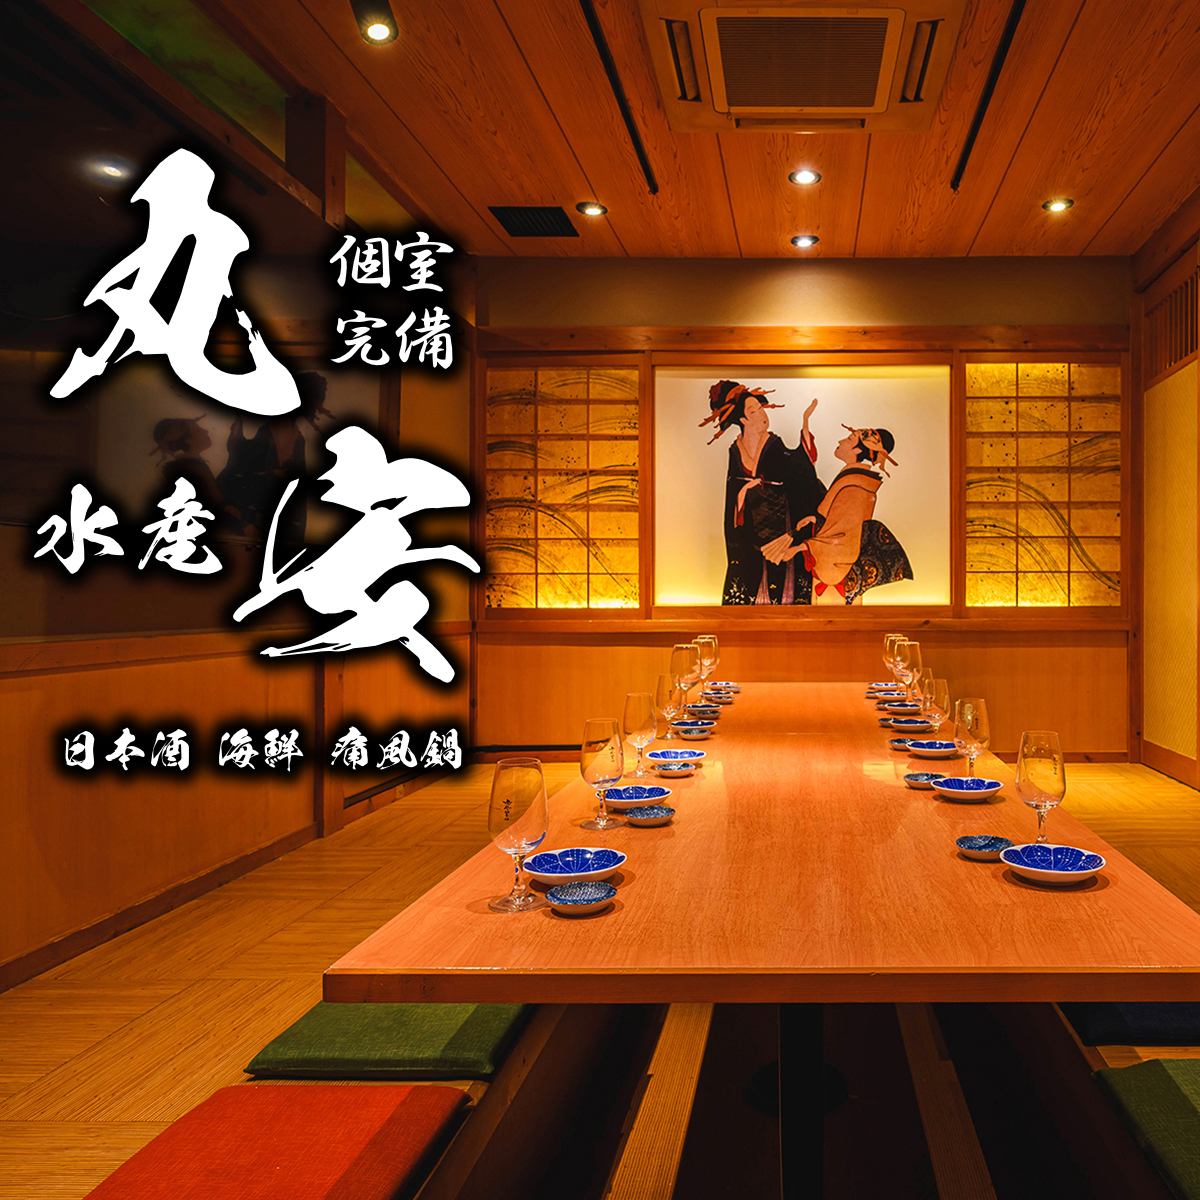 A private room seafood izakaya restaurant near Shinjuku Station that serves delicious fish! Open from 12pm! Recommended for lunch or lunch parties!